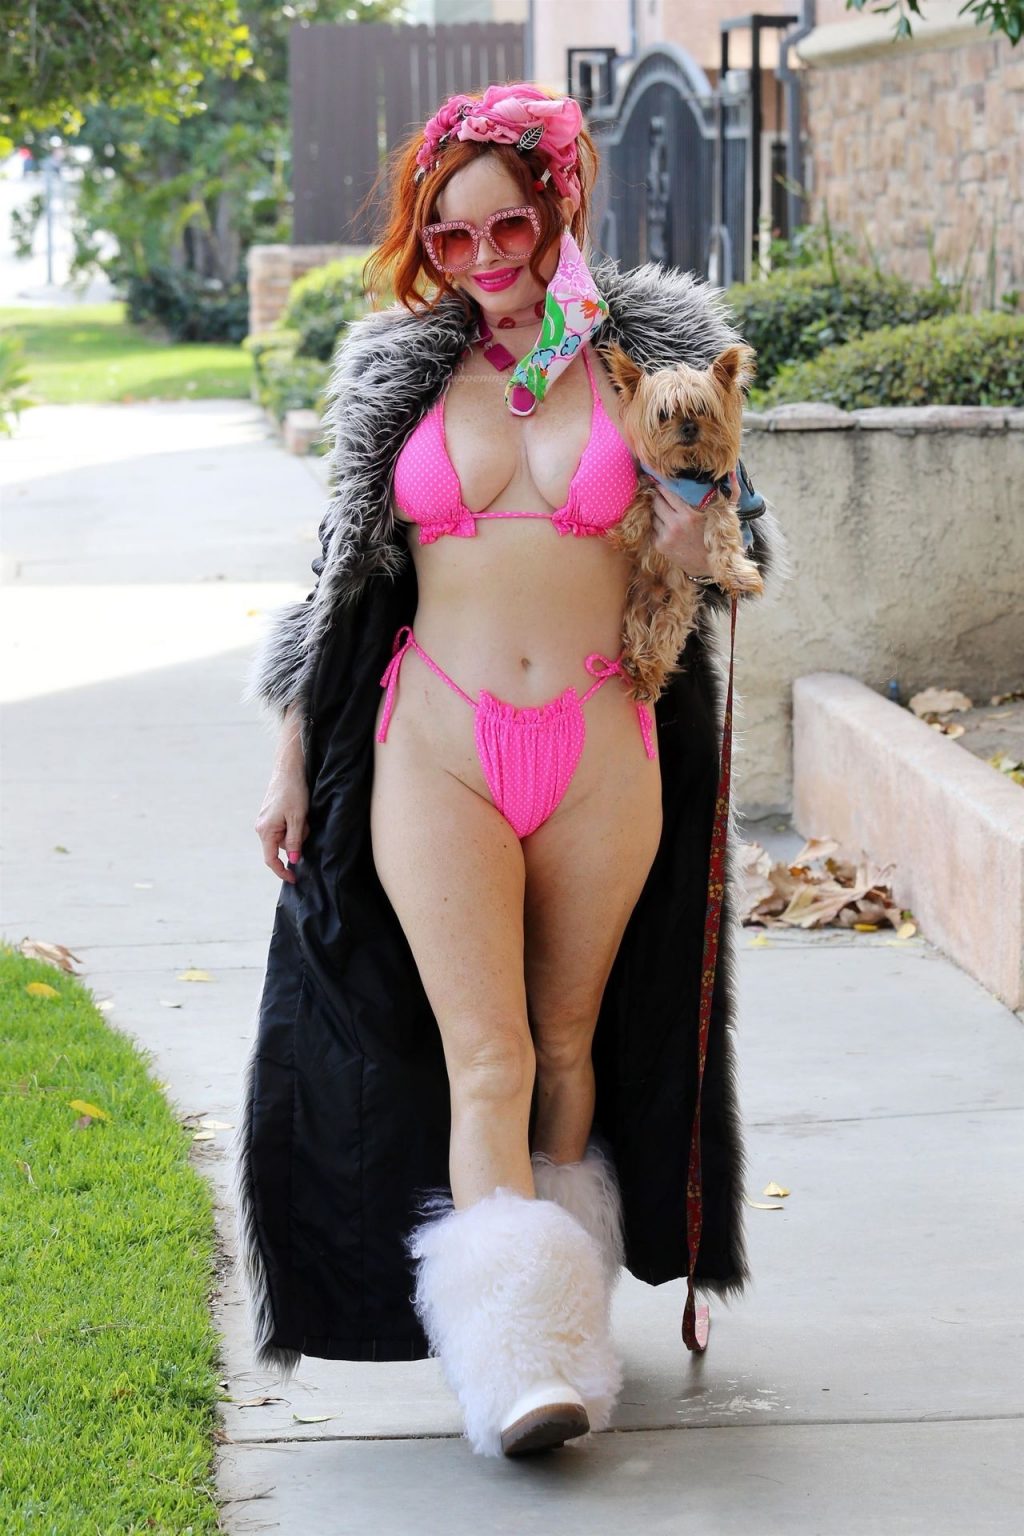 Phoebe Price Shows Off Her Curves in a Pink Bikini (42 Photos)